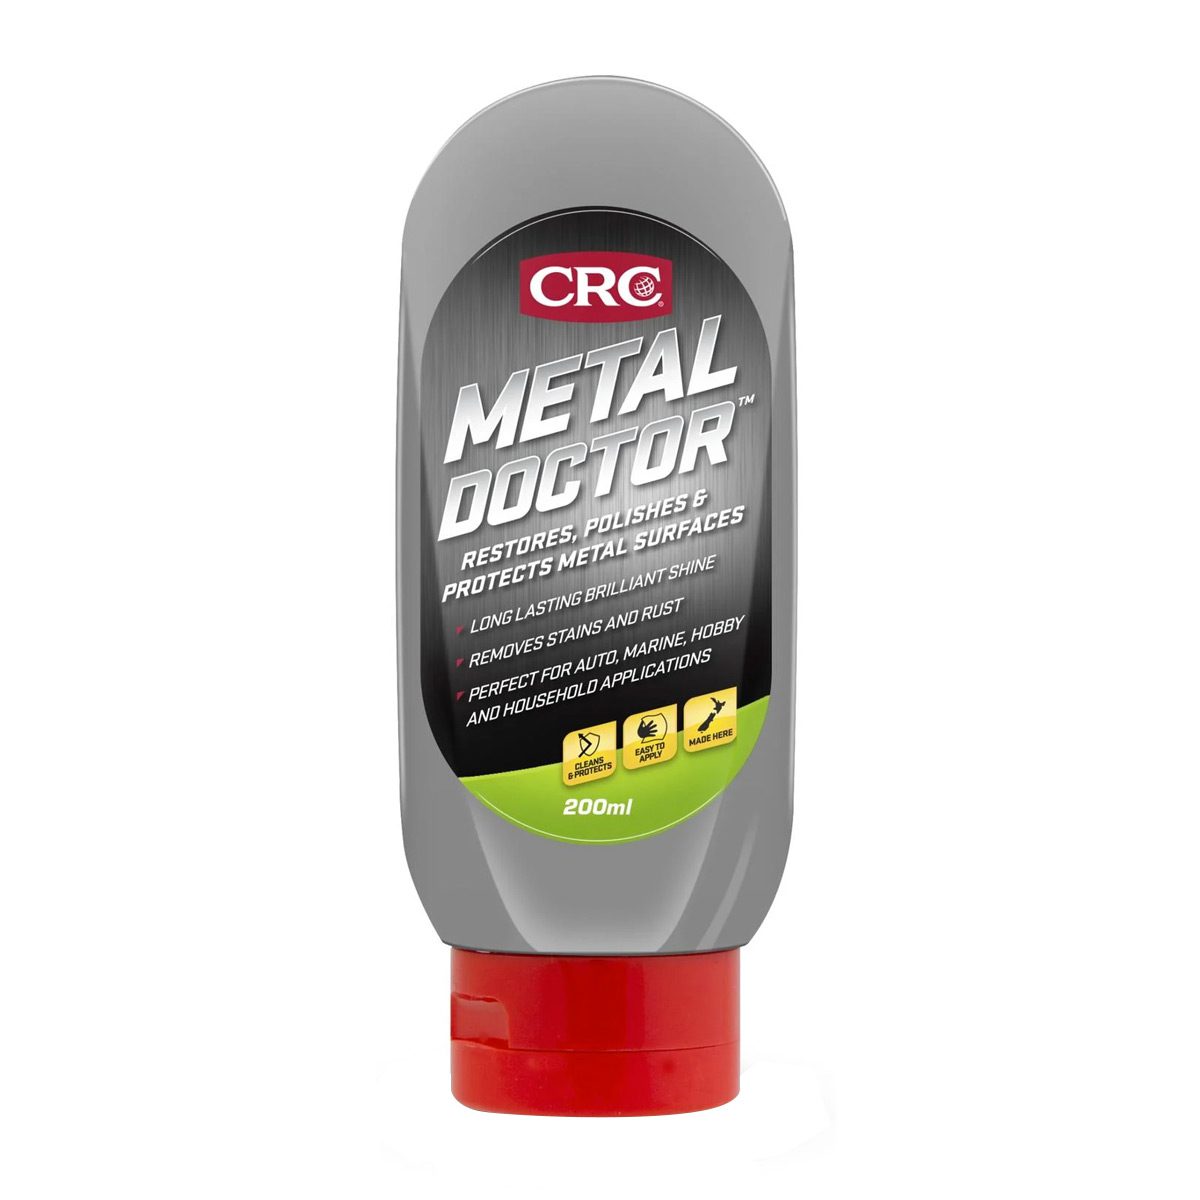 automotive-crc-metal-doctor-220ml-restores-polishes-protects-metal-surfaces-vjs-distributors-C9235